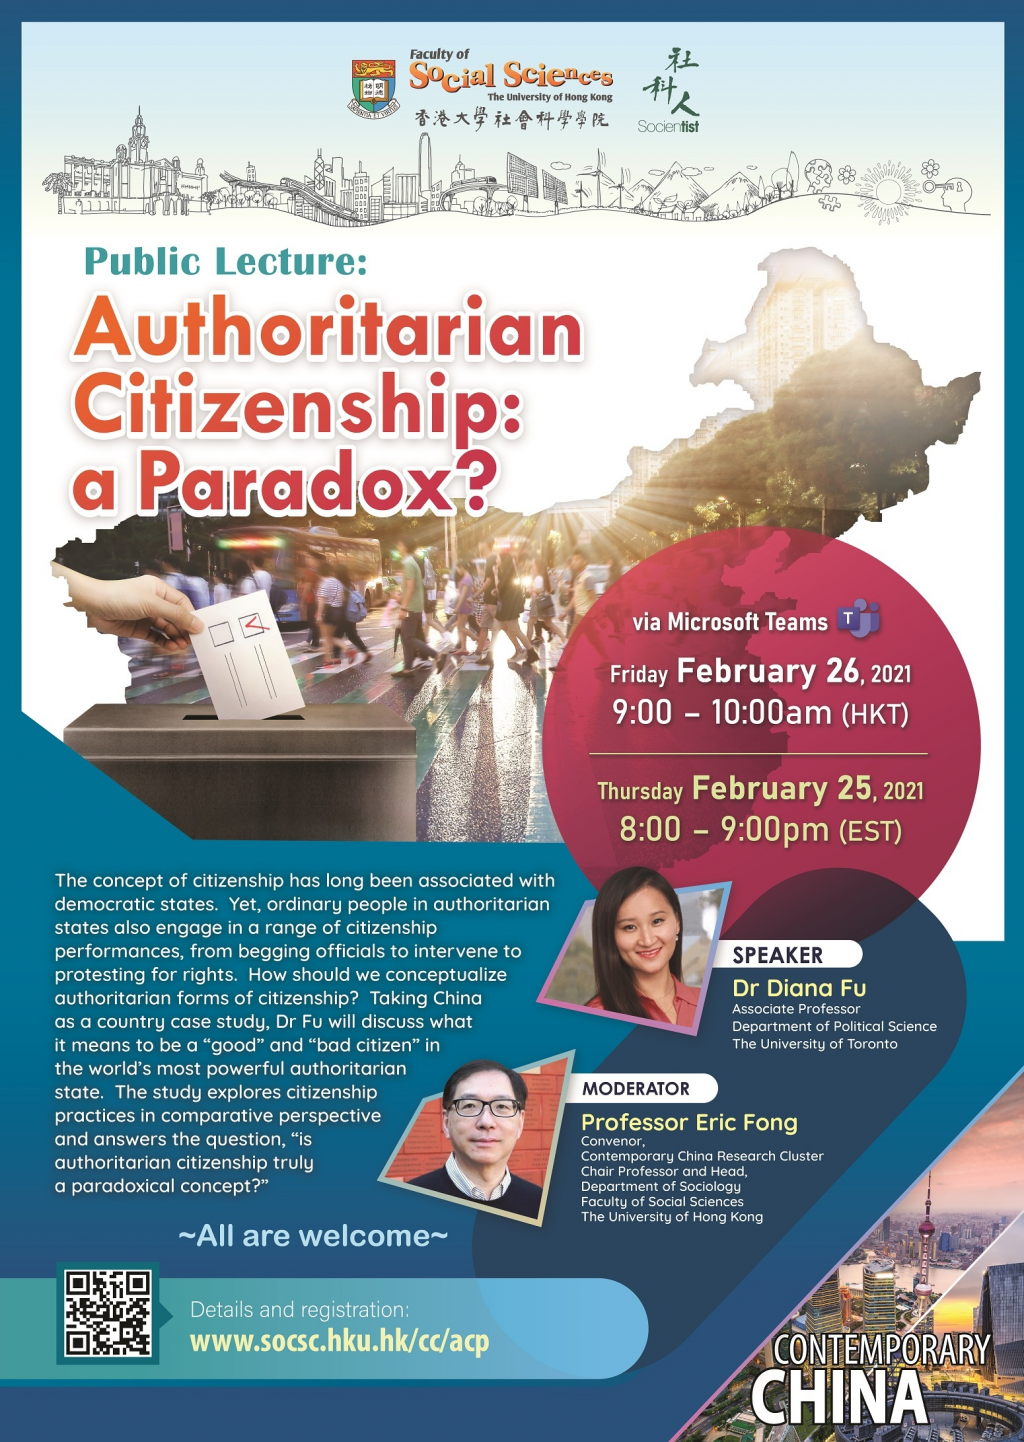 Contemporary China Research Cluster Public Lecture - Authoritarian Citizenship: a Paradox? (February 26, 9am)